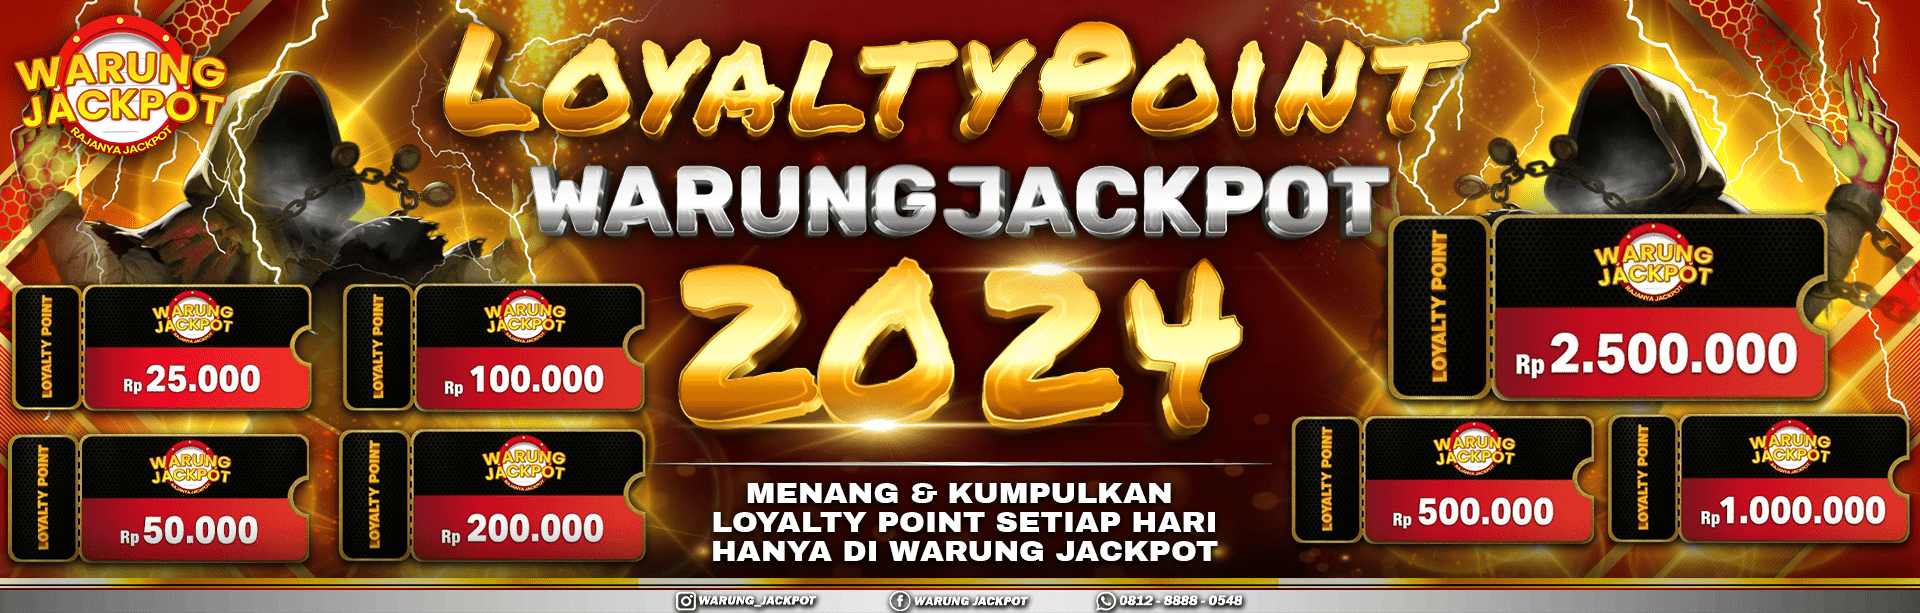 LOYALTY POINT EXCLUSIVE WARUNGJACKPOT